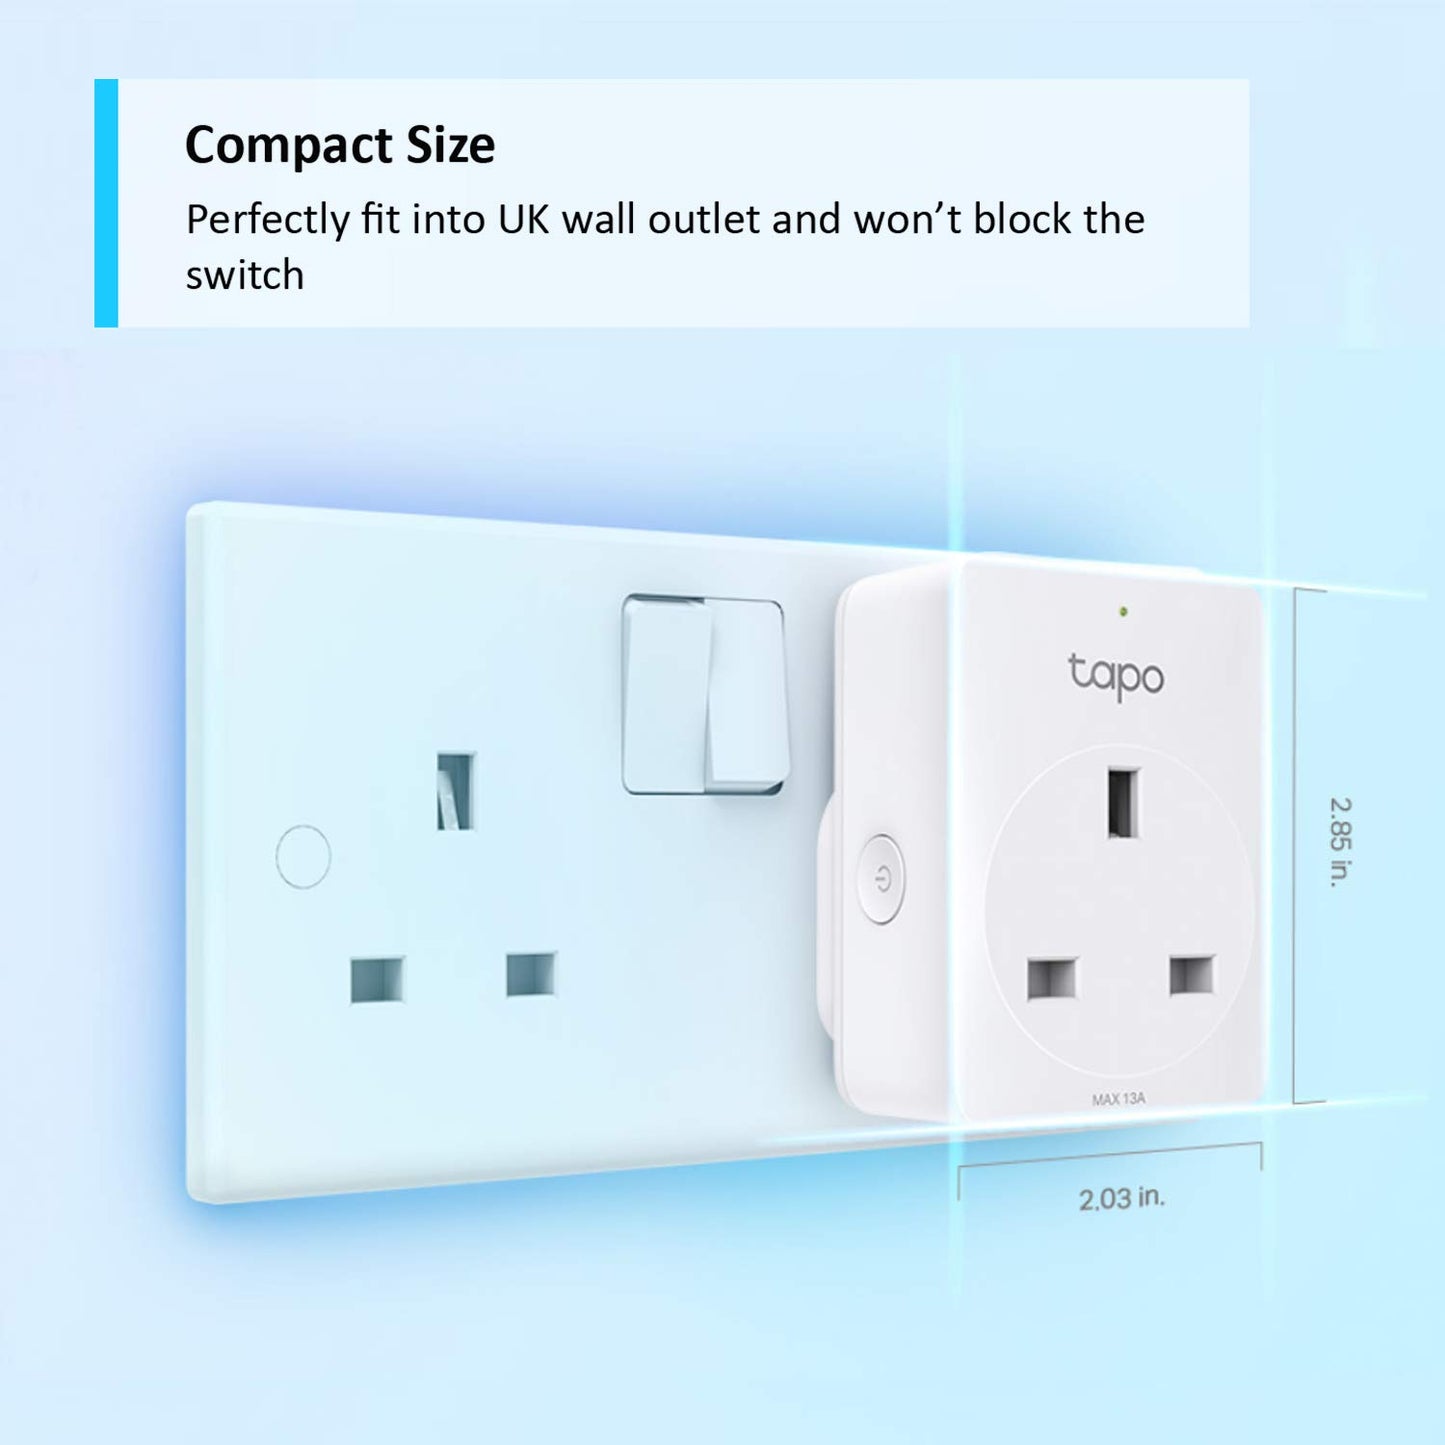 Tapo Smart Plug Wi-Fi Outlet, Works with Amazon Alexa & Google Home,Max 13A Wireless Smart Socket, Device Sharing, Without Energy Monitoring, No Hub Required,Tapo P100(4-pack)